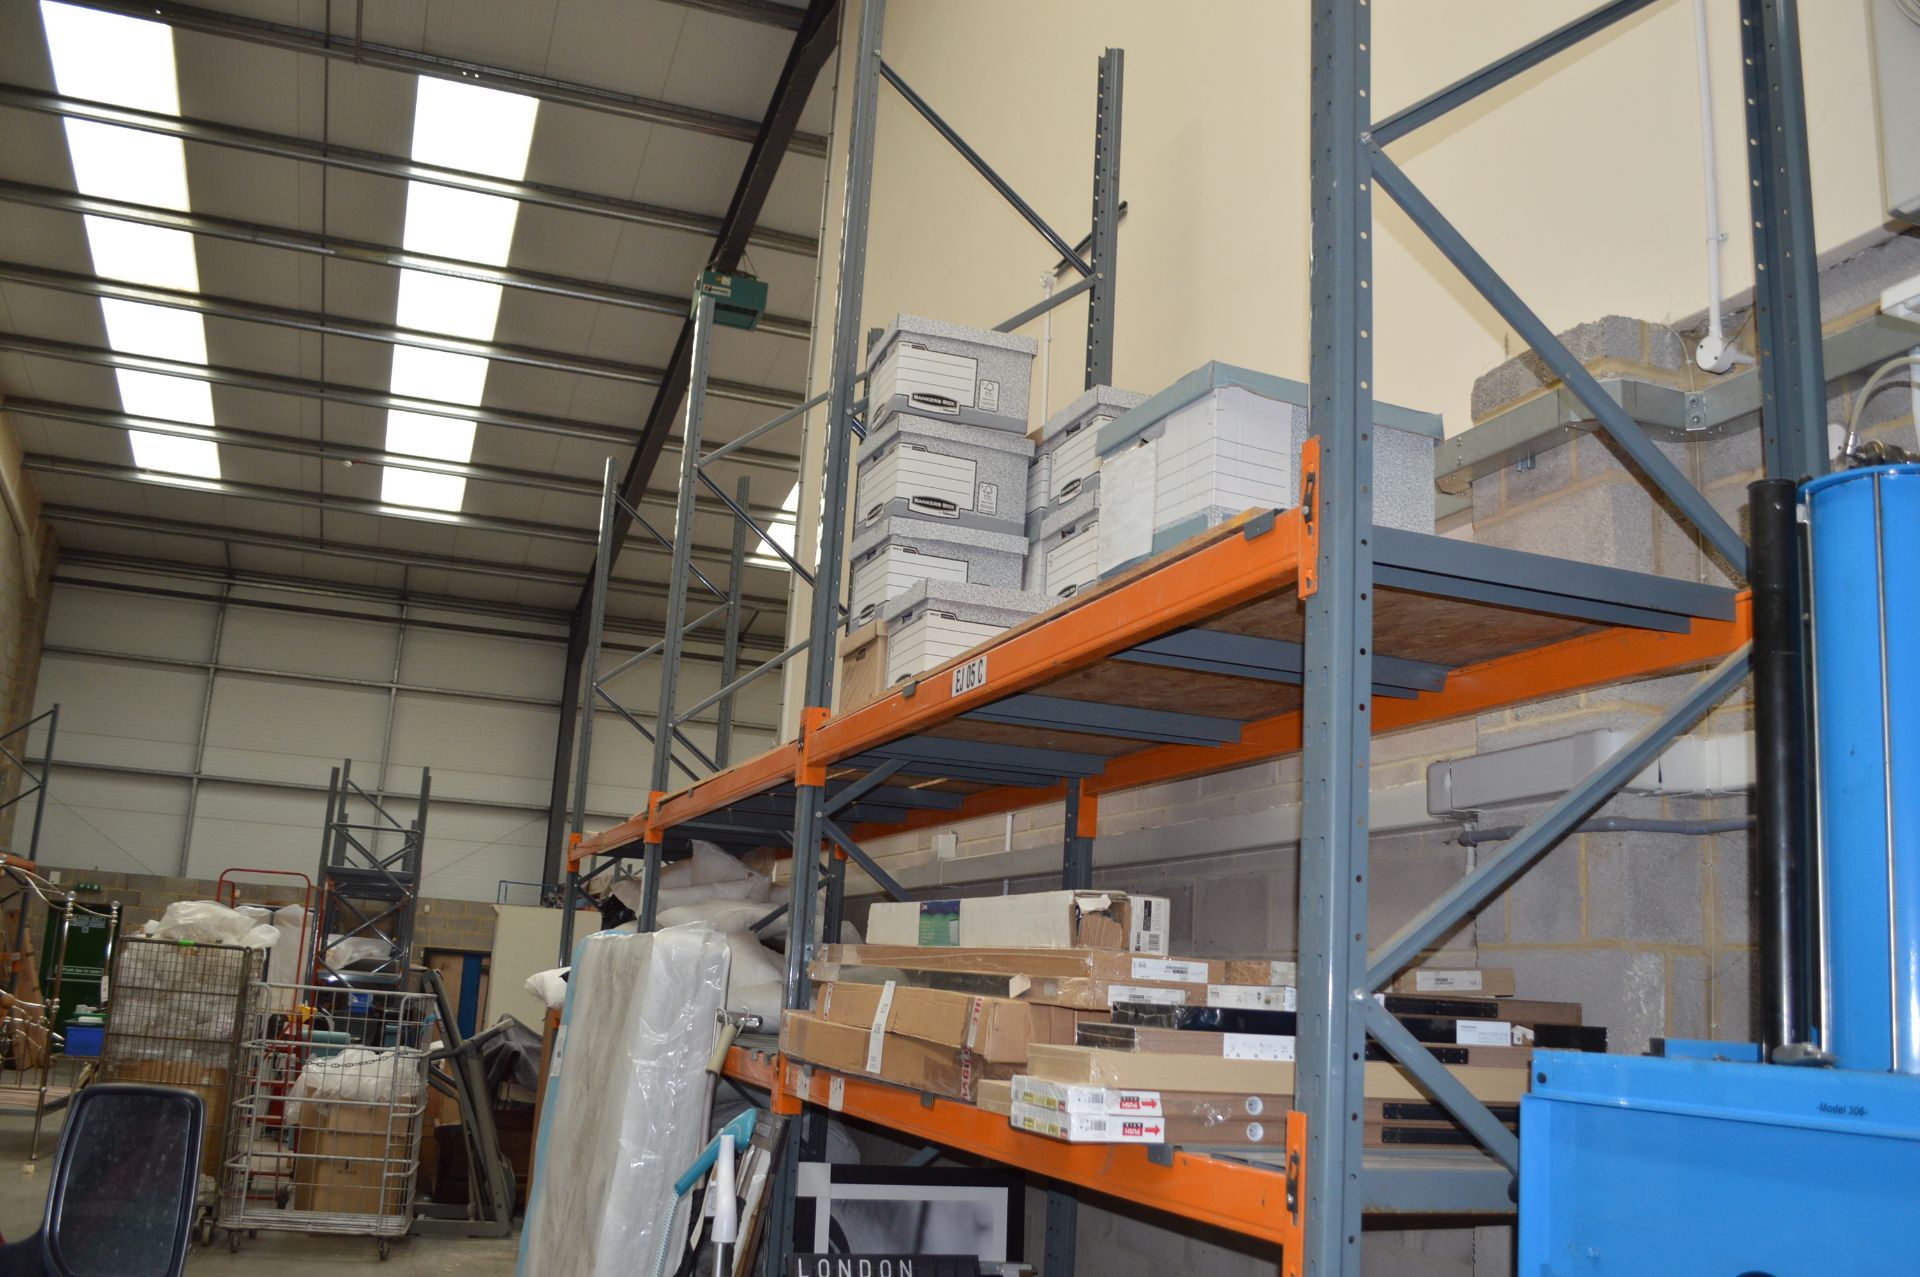 Dexion Boltless Pallet Racking comprising: 4: 4mtr Uprights 12: 2.7mtr Beams (Does not include